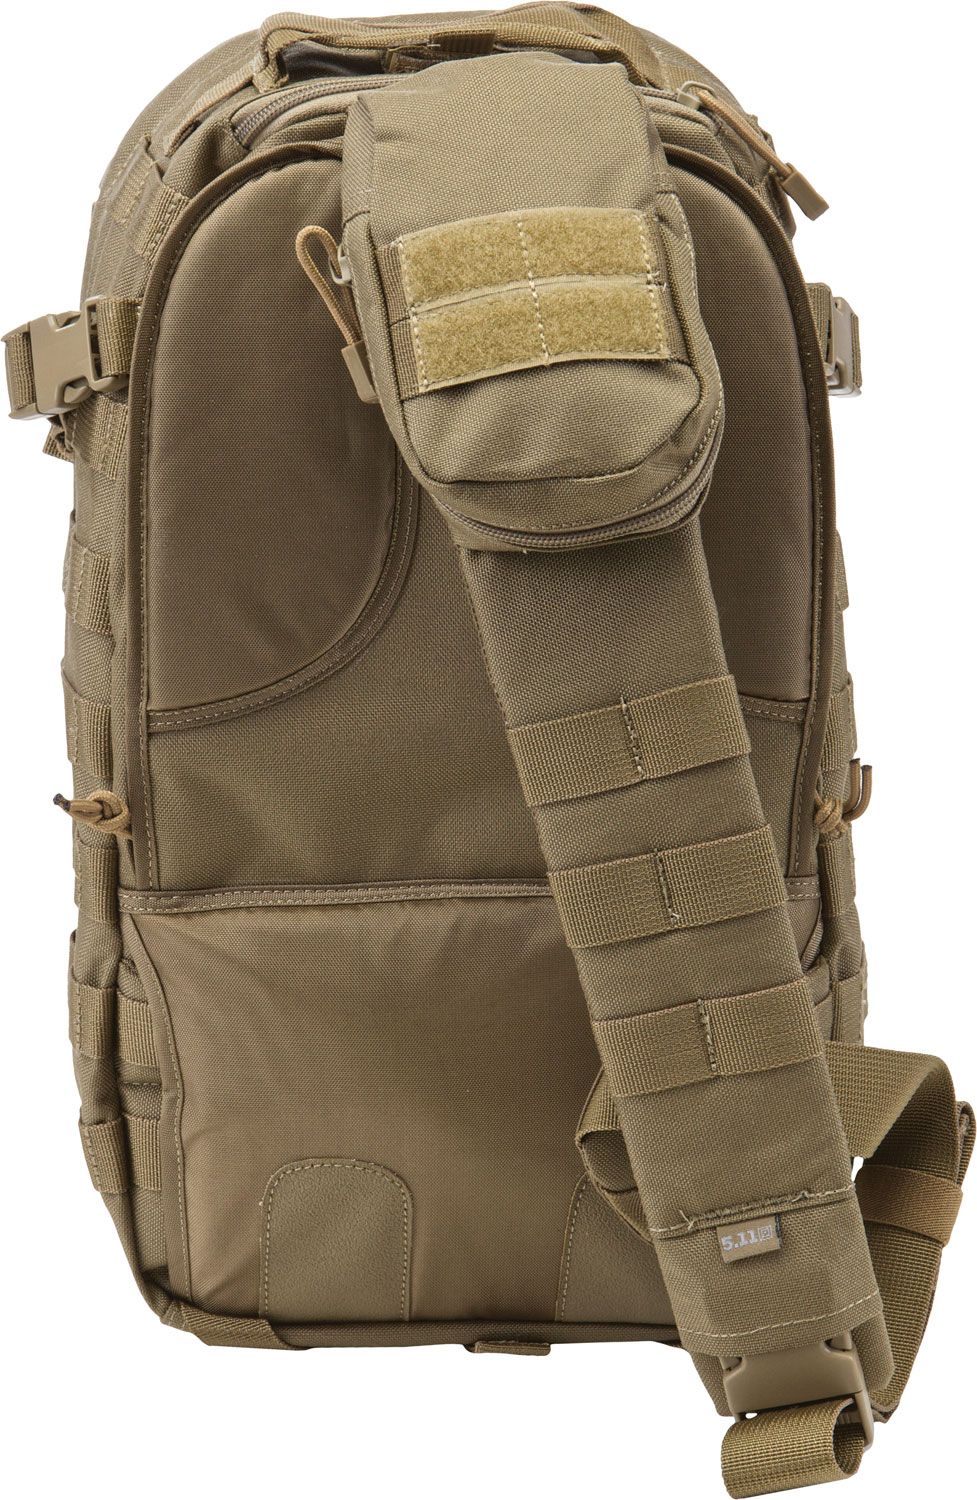 5.11 Tactical Rush MOAB 10 Backpack, Double Tap (56964-026 ...